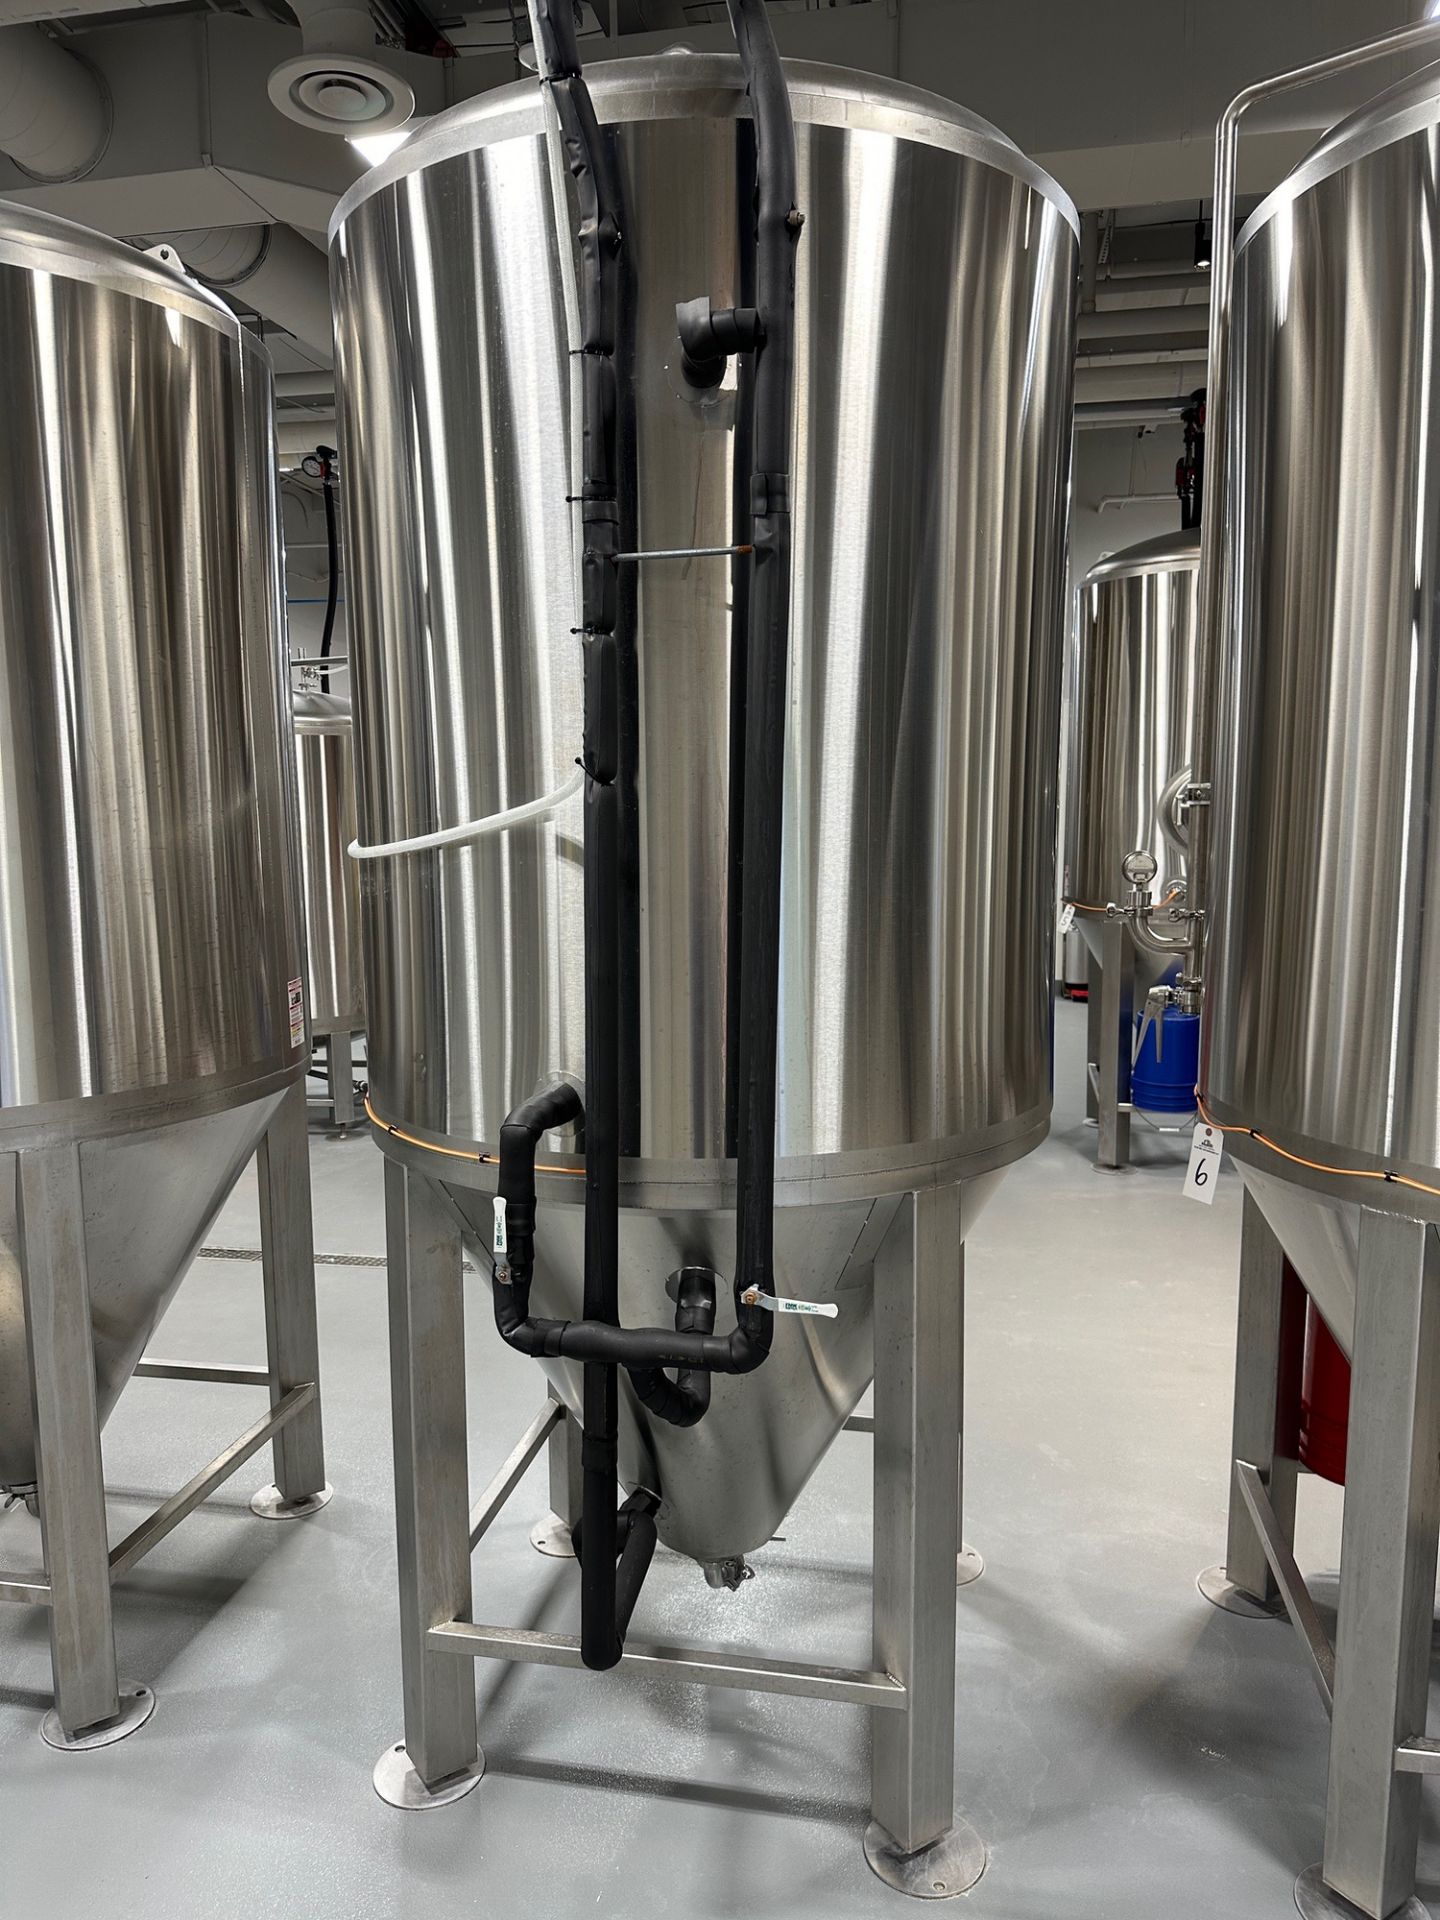 Portland Kettle Works 15 BBL Fermentation Tank - Cone Bottom, Glycol Jacketed, Mandoor, Zwickle - Image 2 of 2